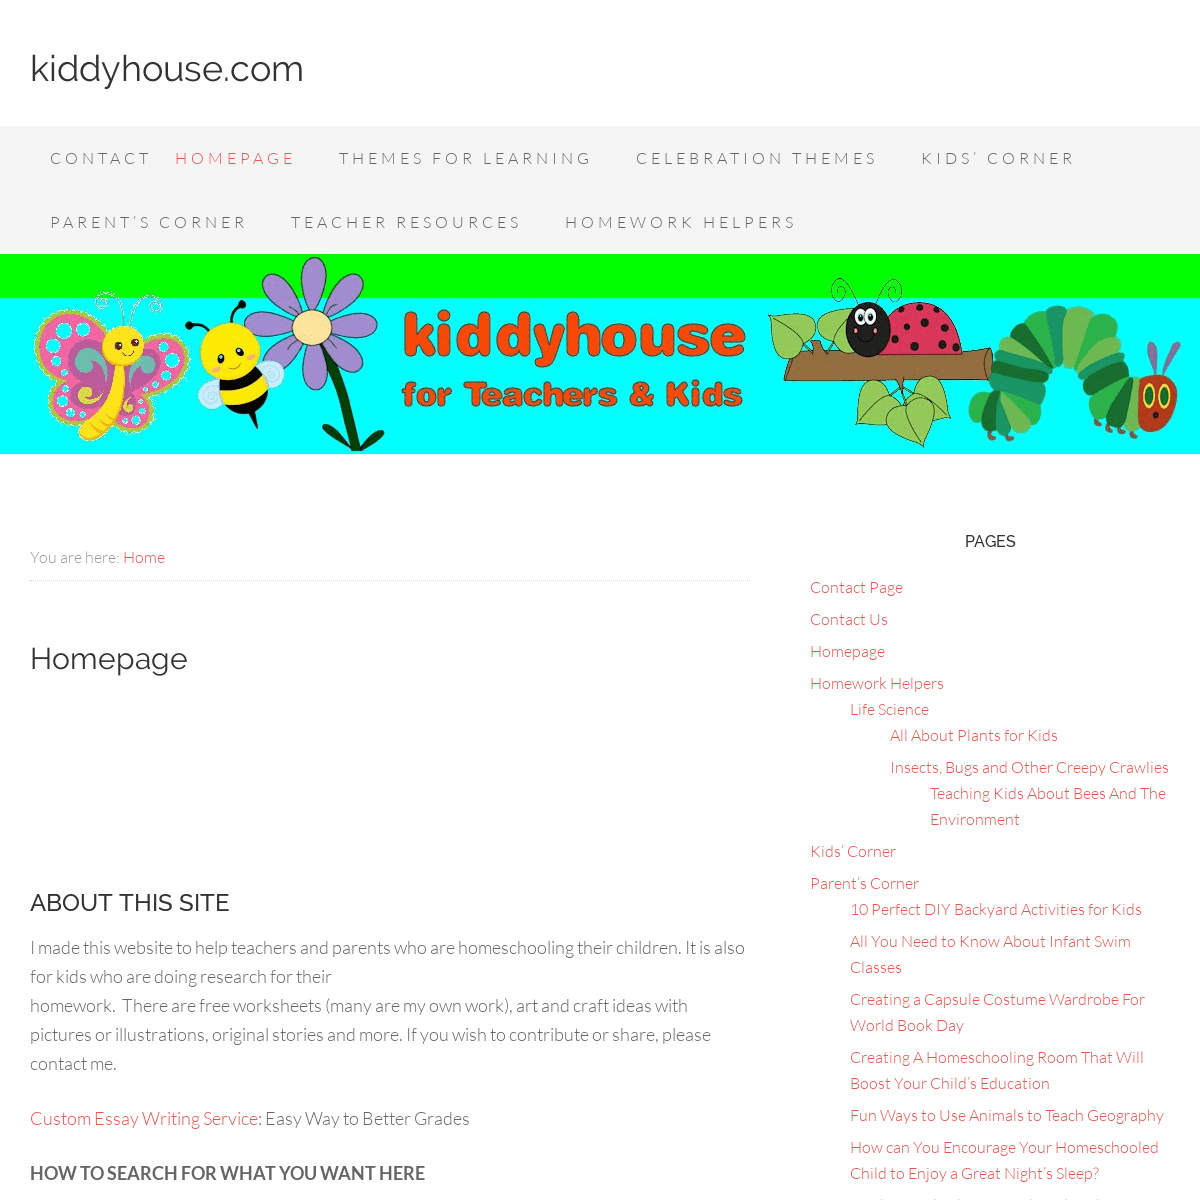 A complete backup of kiddyhouse.com